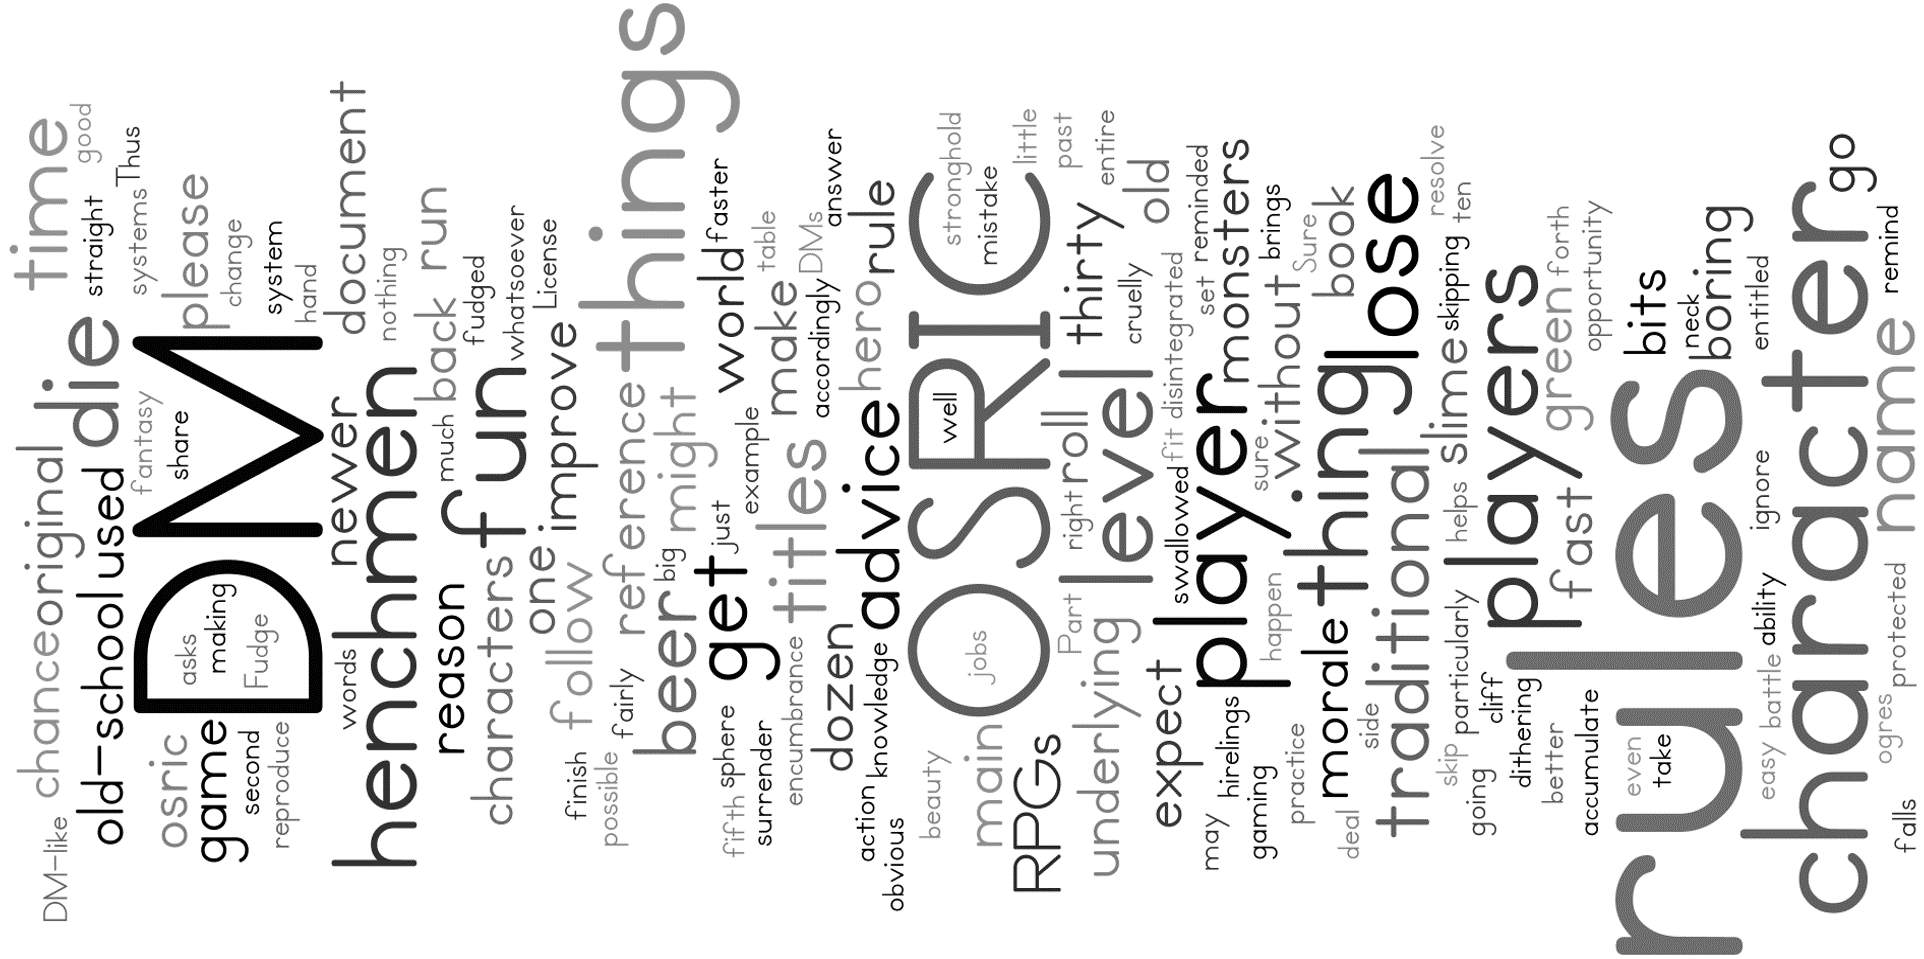 Wordle3.png  by rredmond